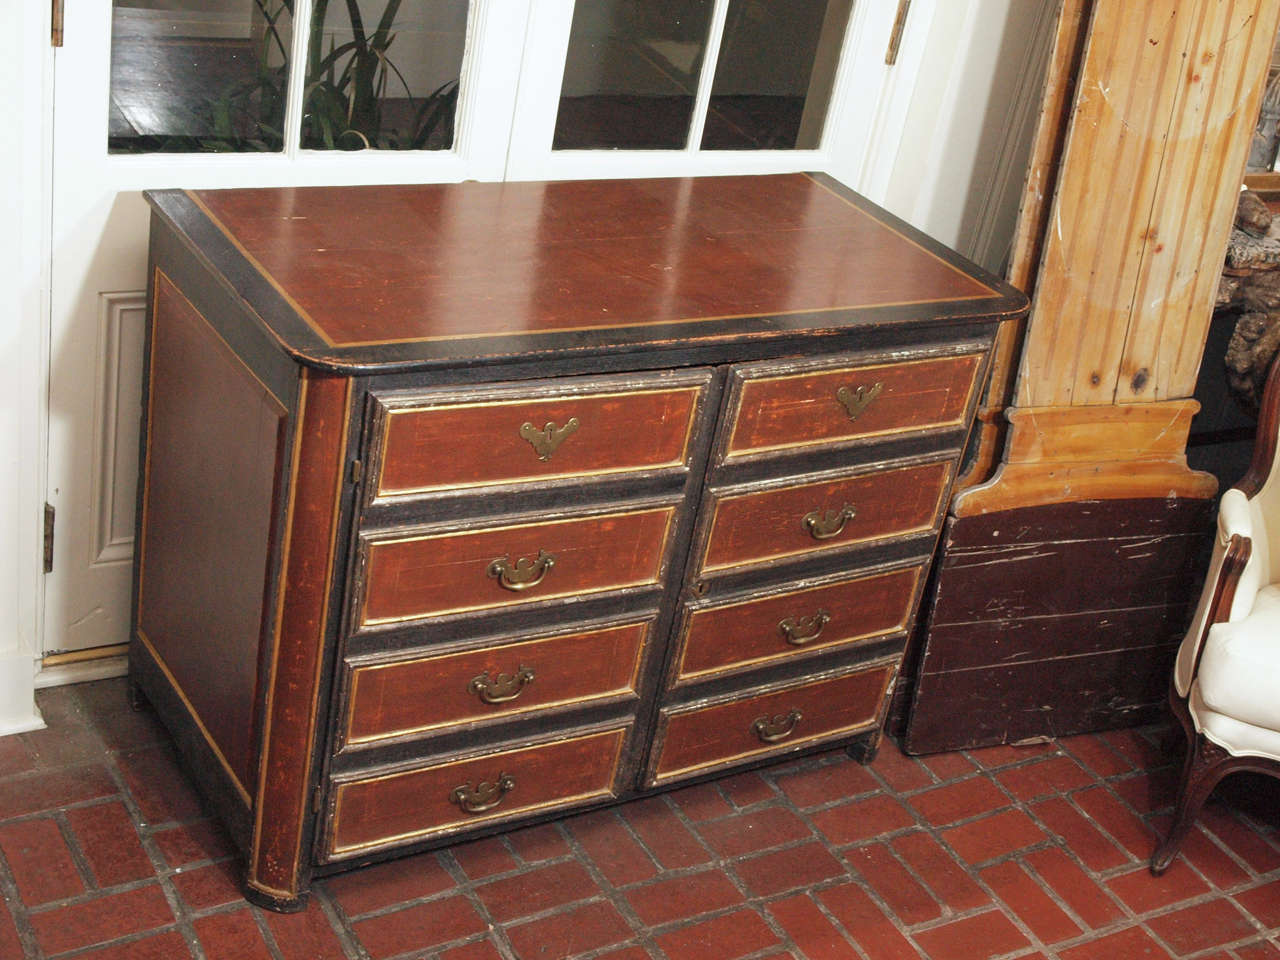 19th century two door painted and giltwood French Louis XVI map chest with two pull-out shelves. Gorgeous storage!